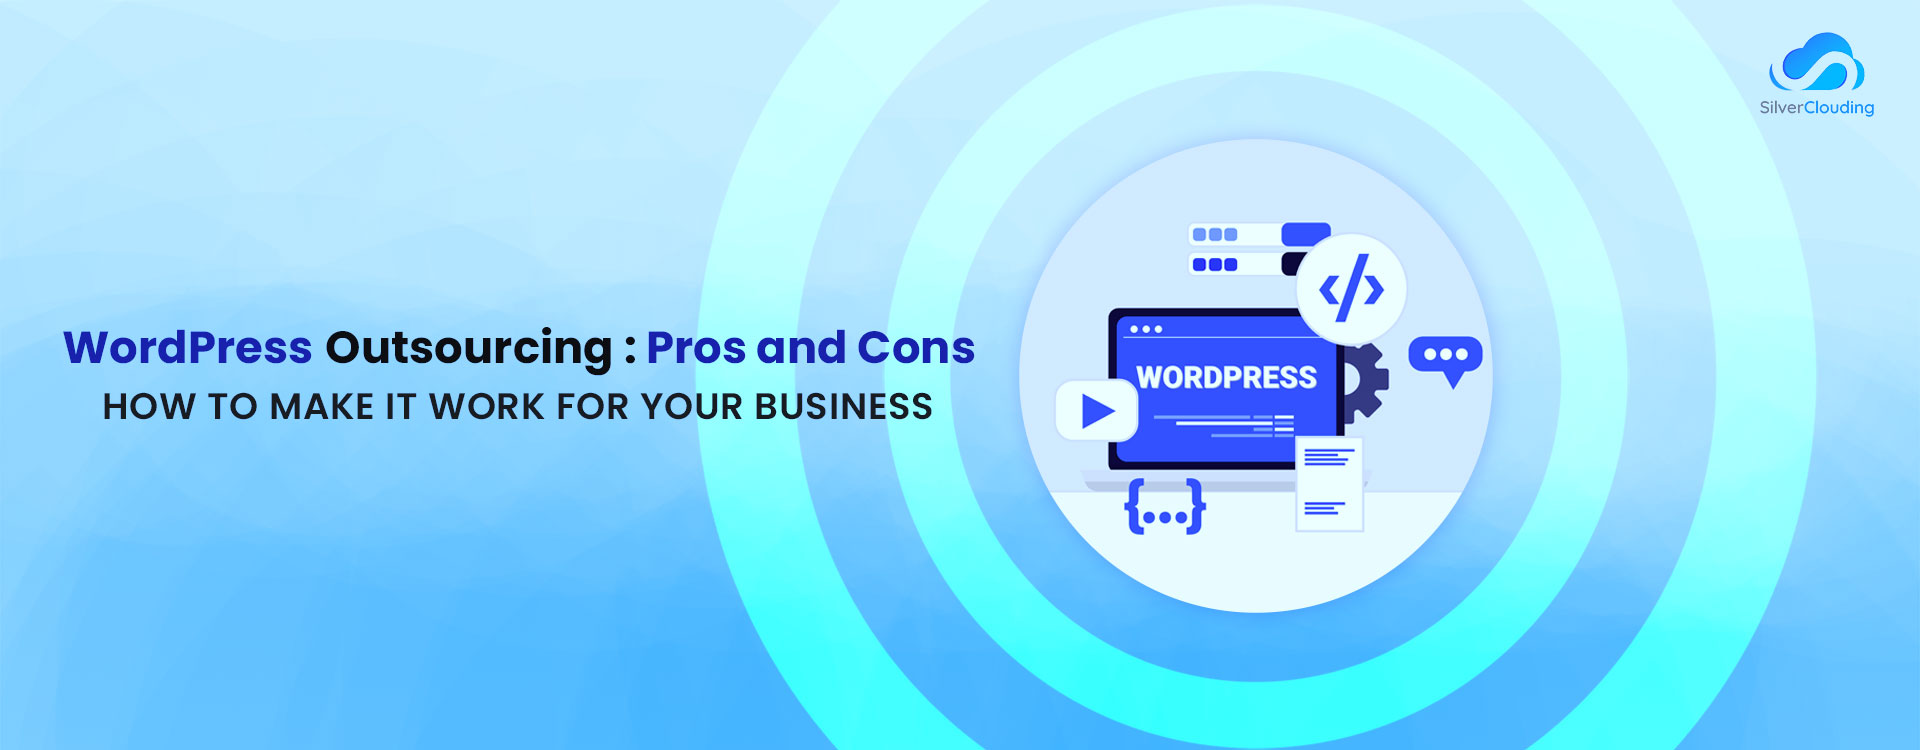 WordPress Outsourcing: Pros and Cons